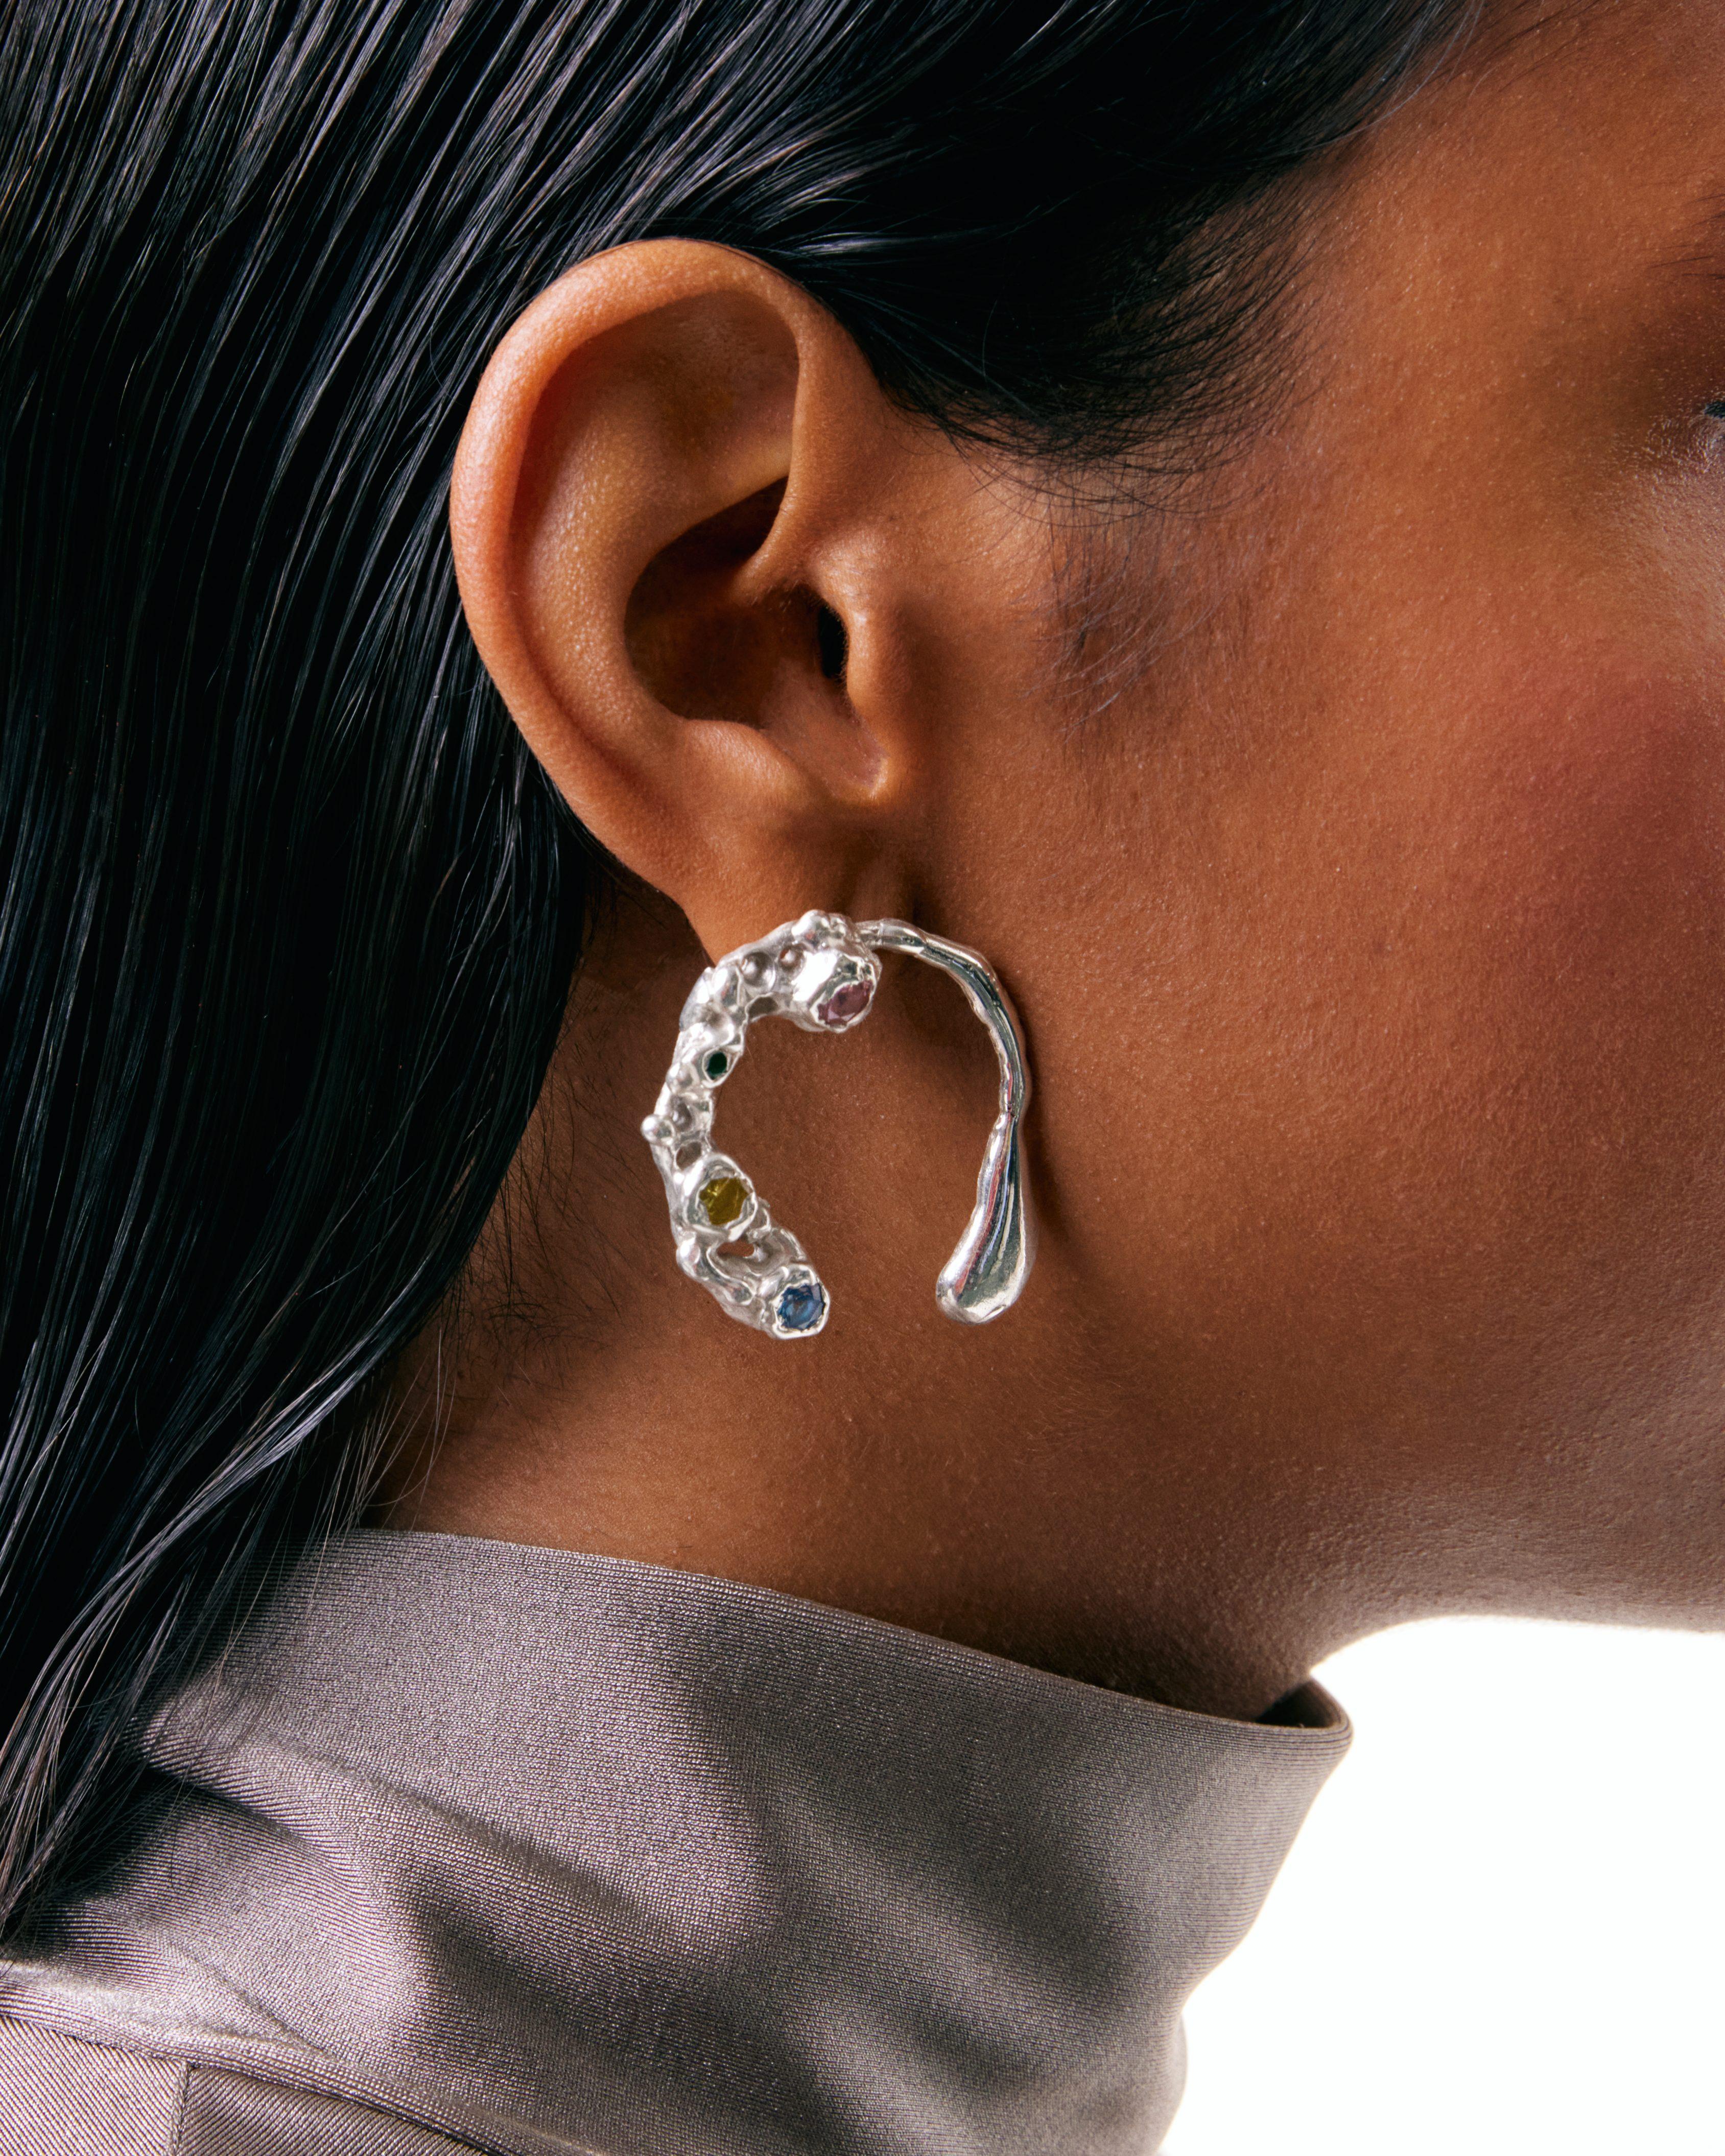 (Ec) Cinetic is a Silver earring with an organic shape,  holes and little zircons. Butterfly fastening. The materials are 95% sterling silver and 5% Spanish Zircon. 

Sold as single. For pierced ears.

Individually hand-crafted in Spain. This means